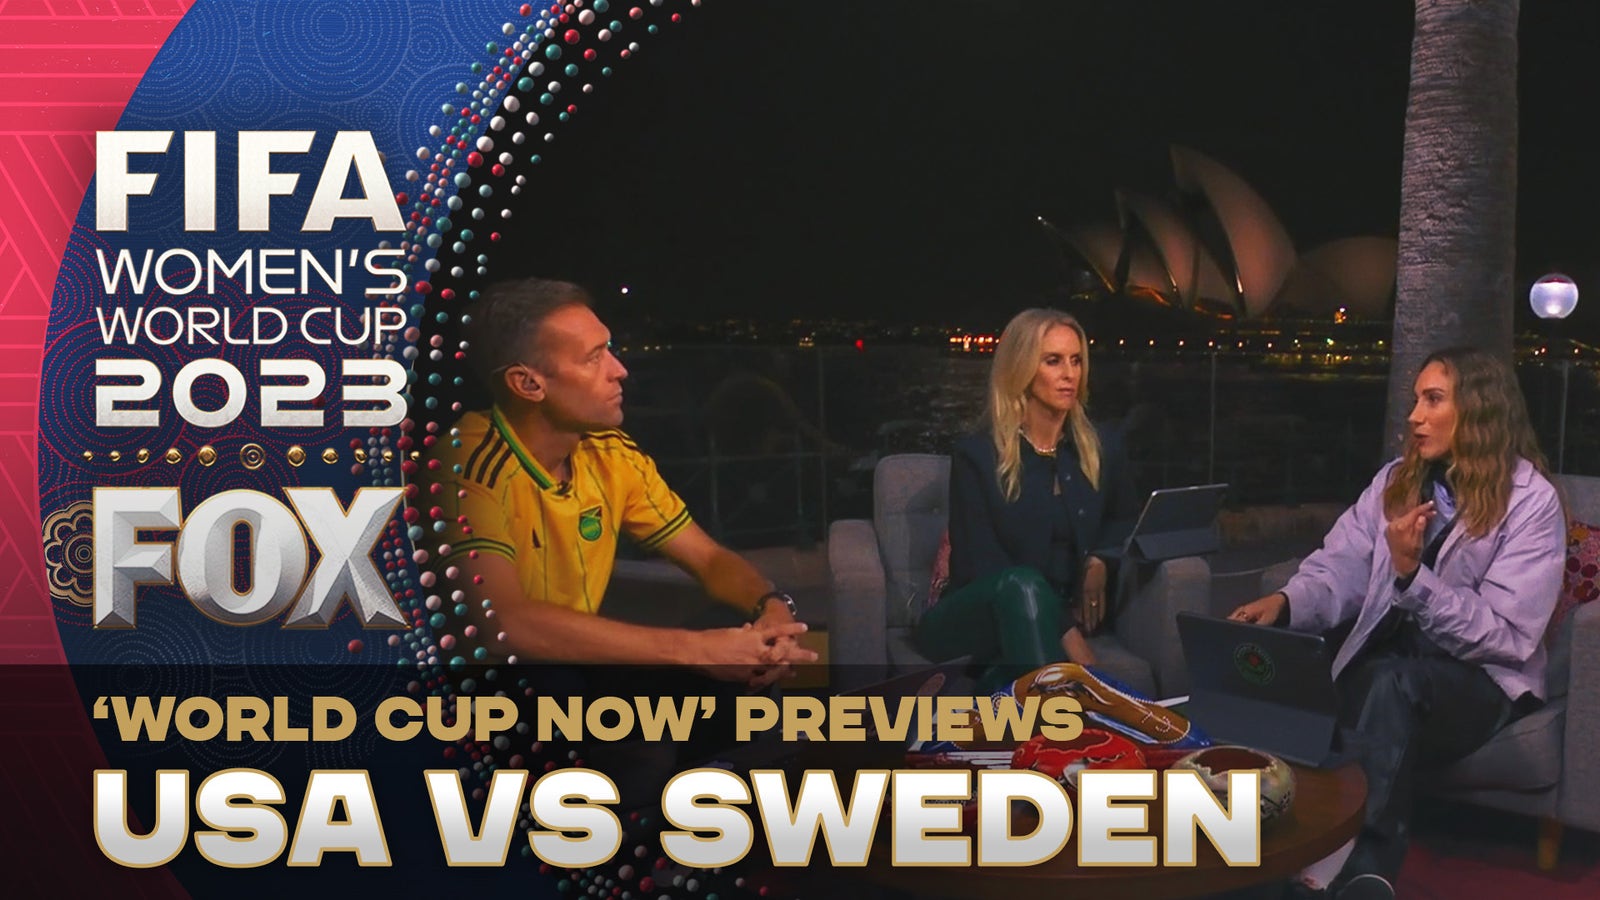 United States vs. Sweden preview | World Cup NOW